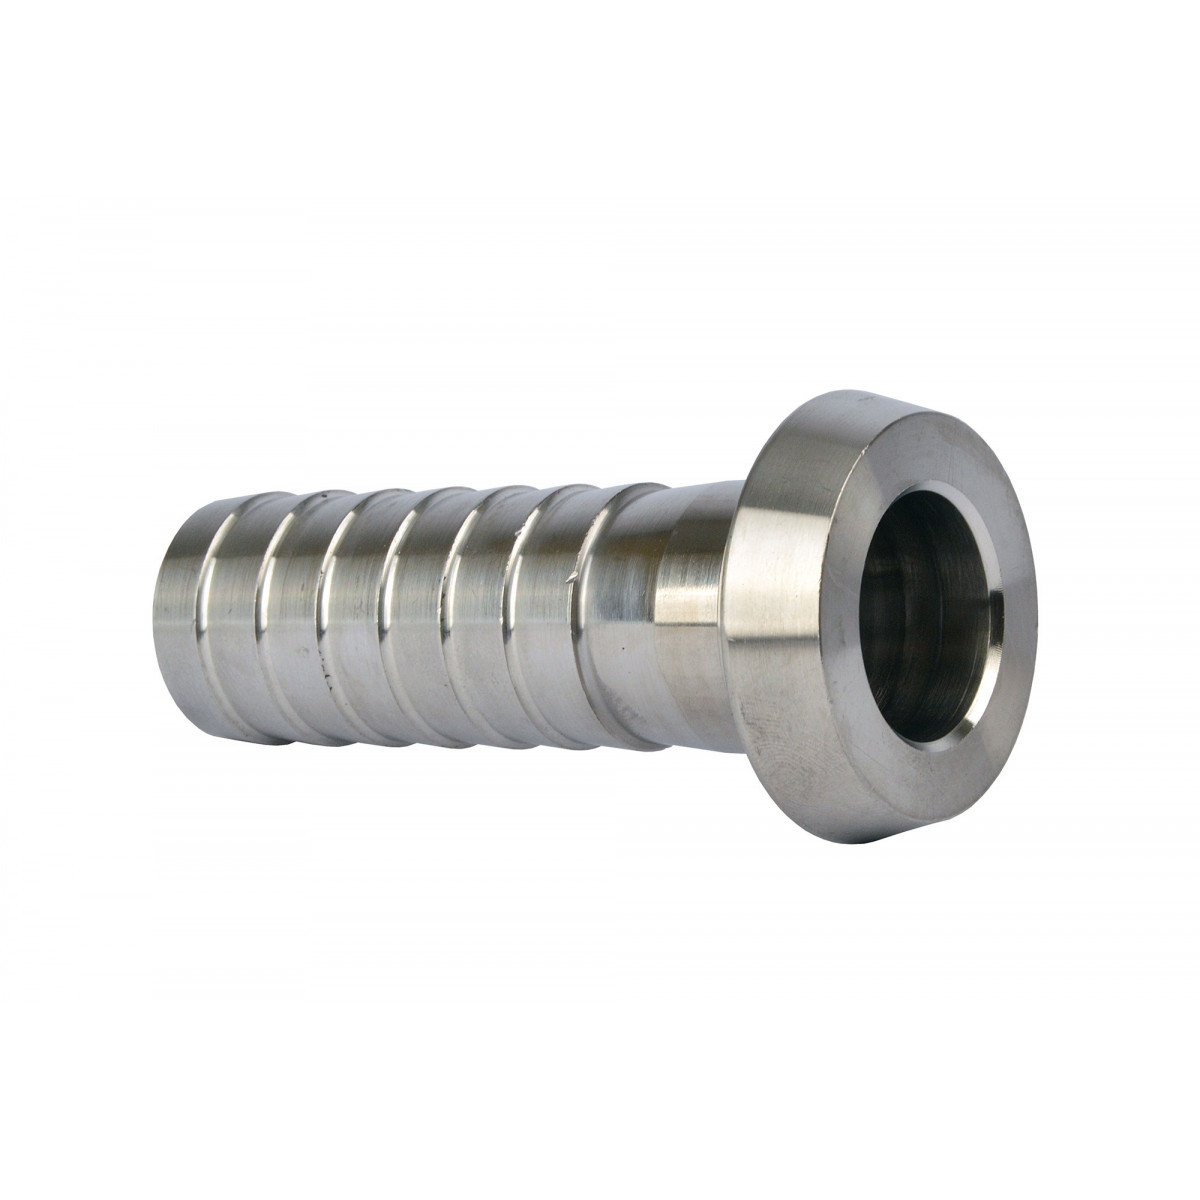 Embout tuyau 26,9 mm x DIN 25 douille